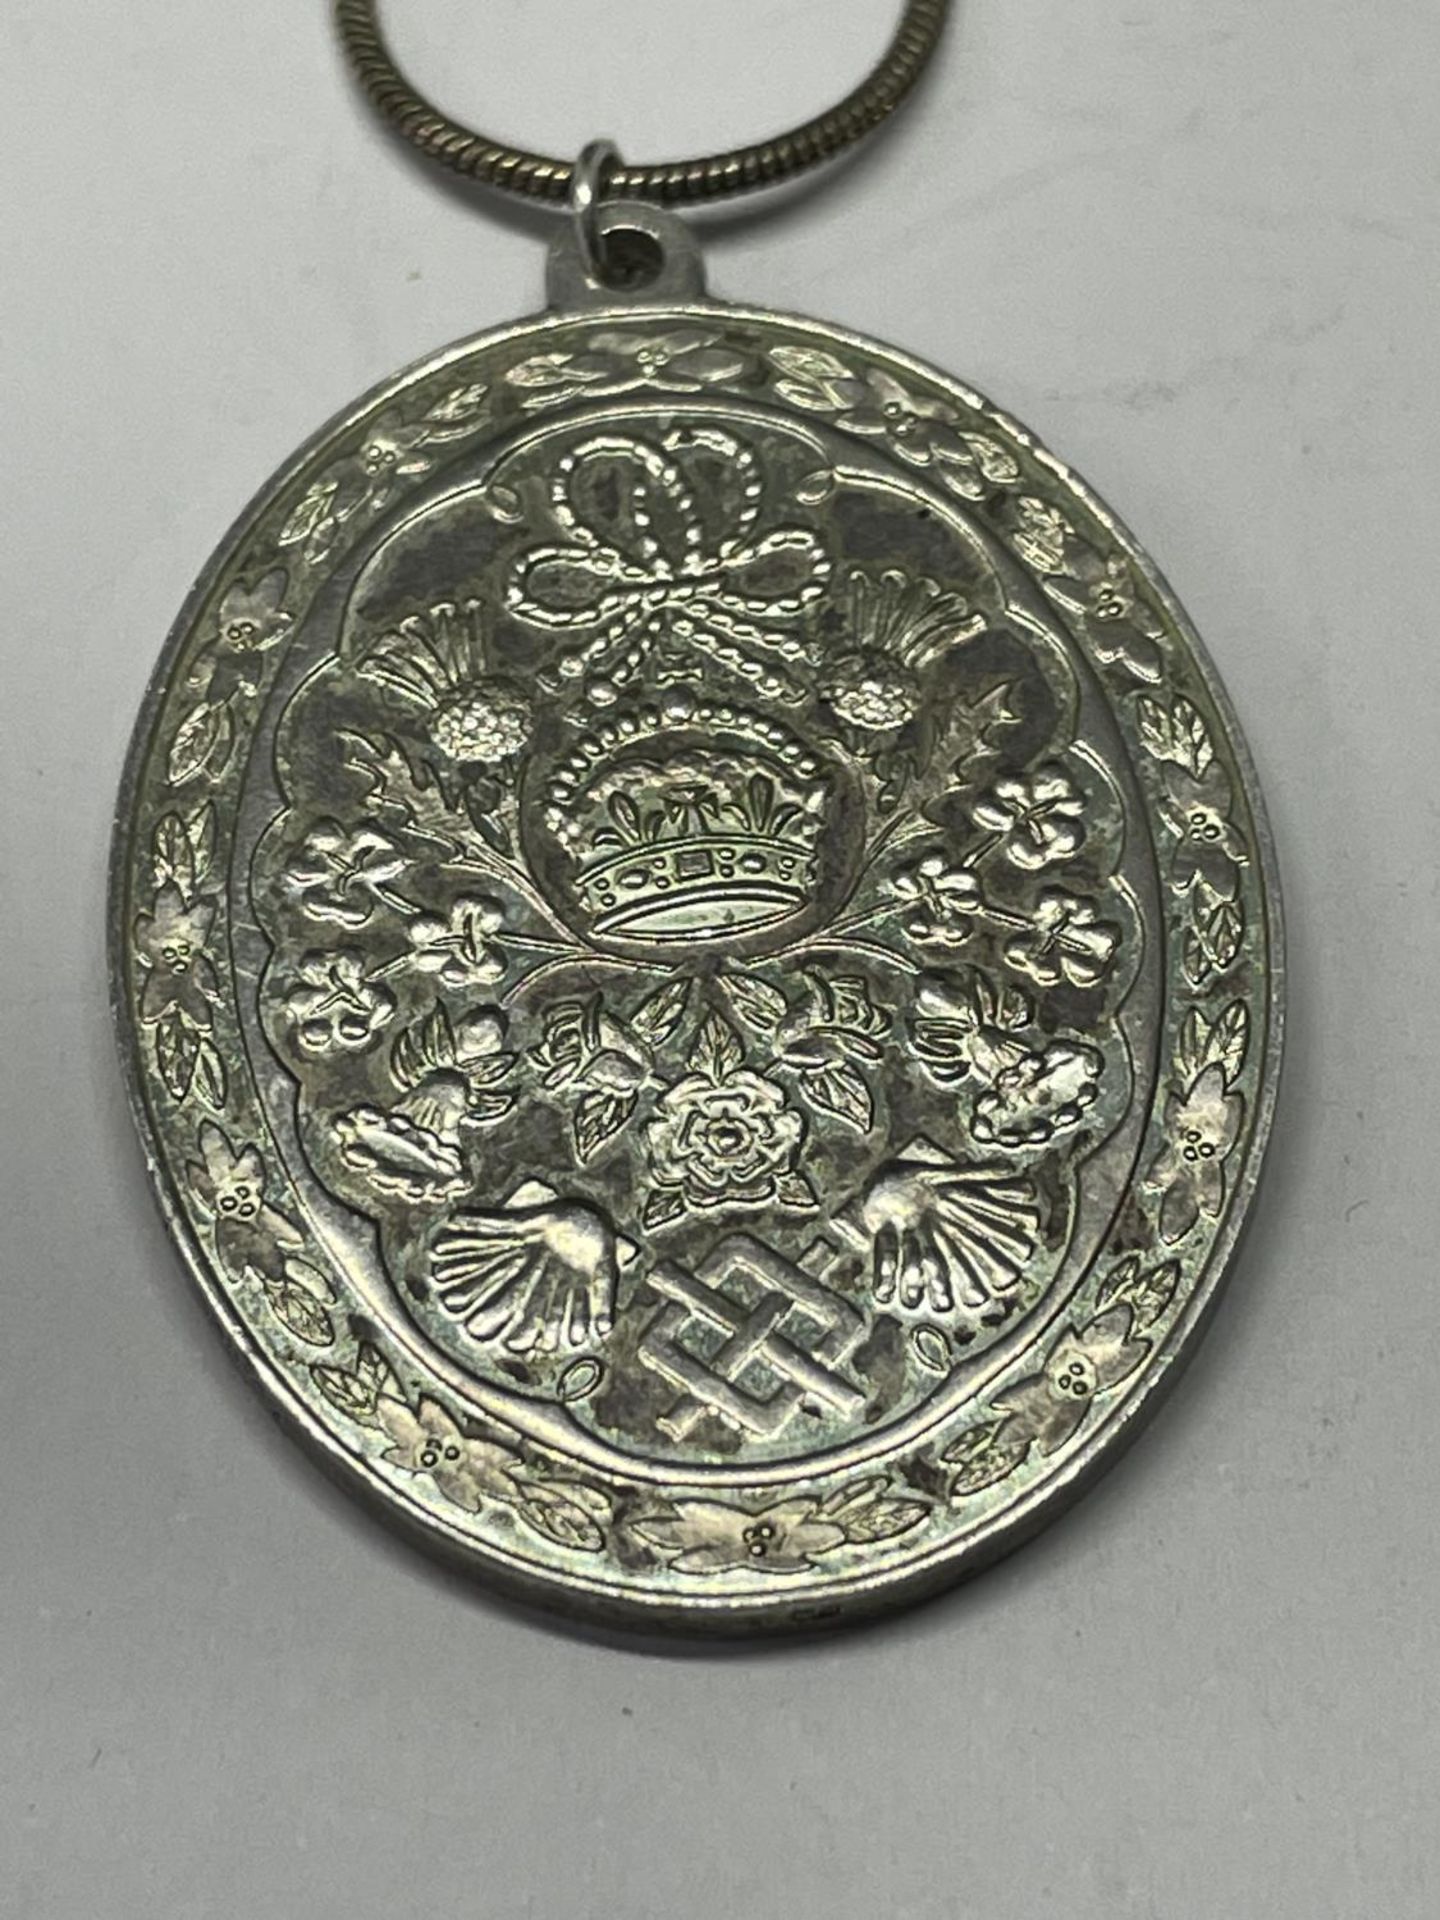 A MARKED SILVER MEDALLION IN A PRESENTATION BOX - Image 2 of 4